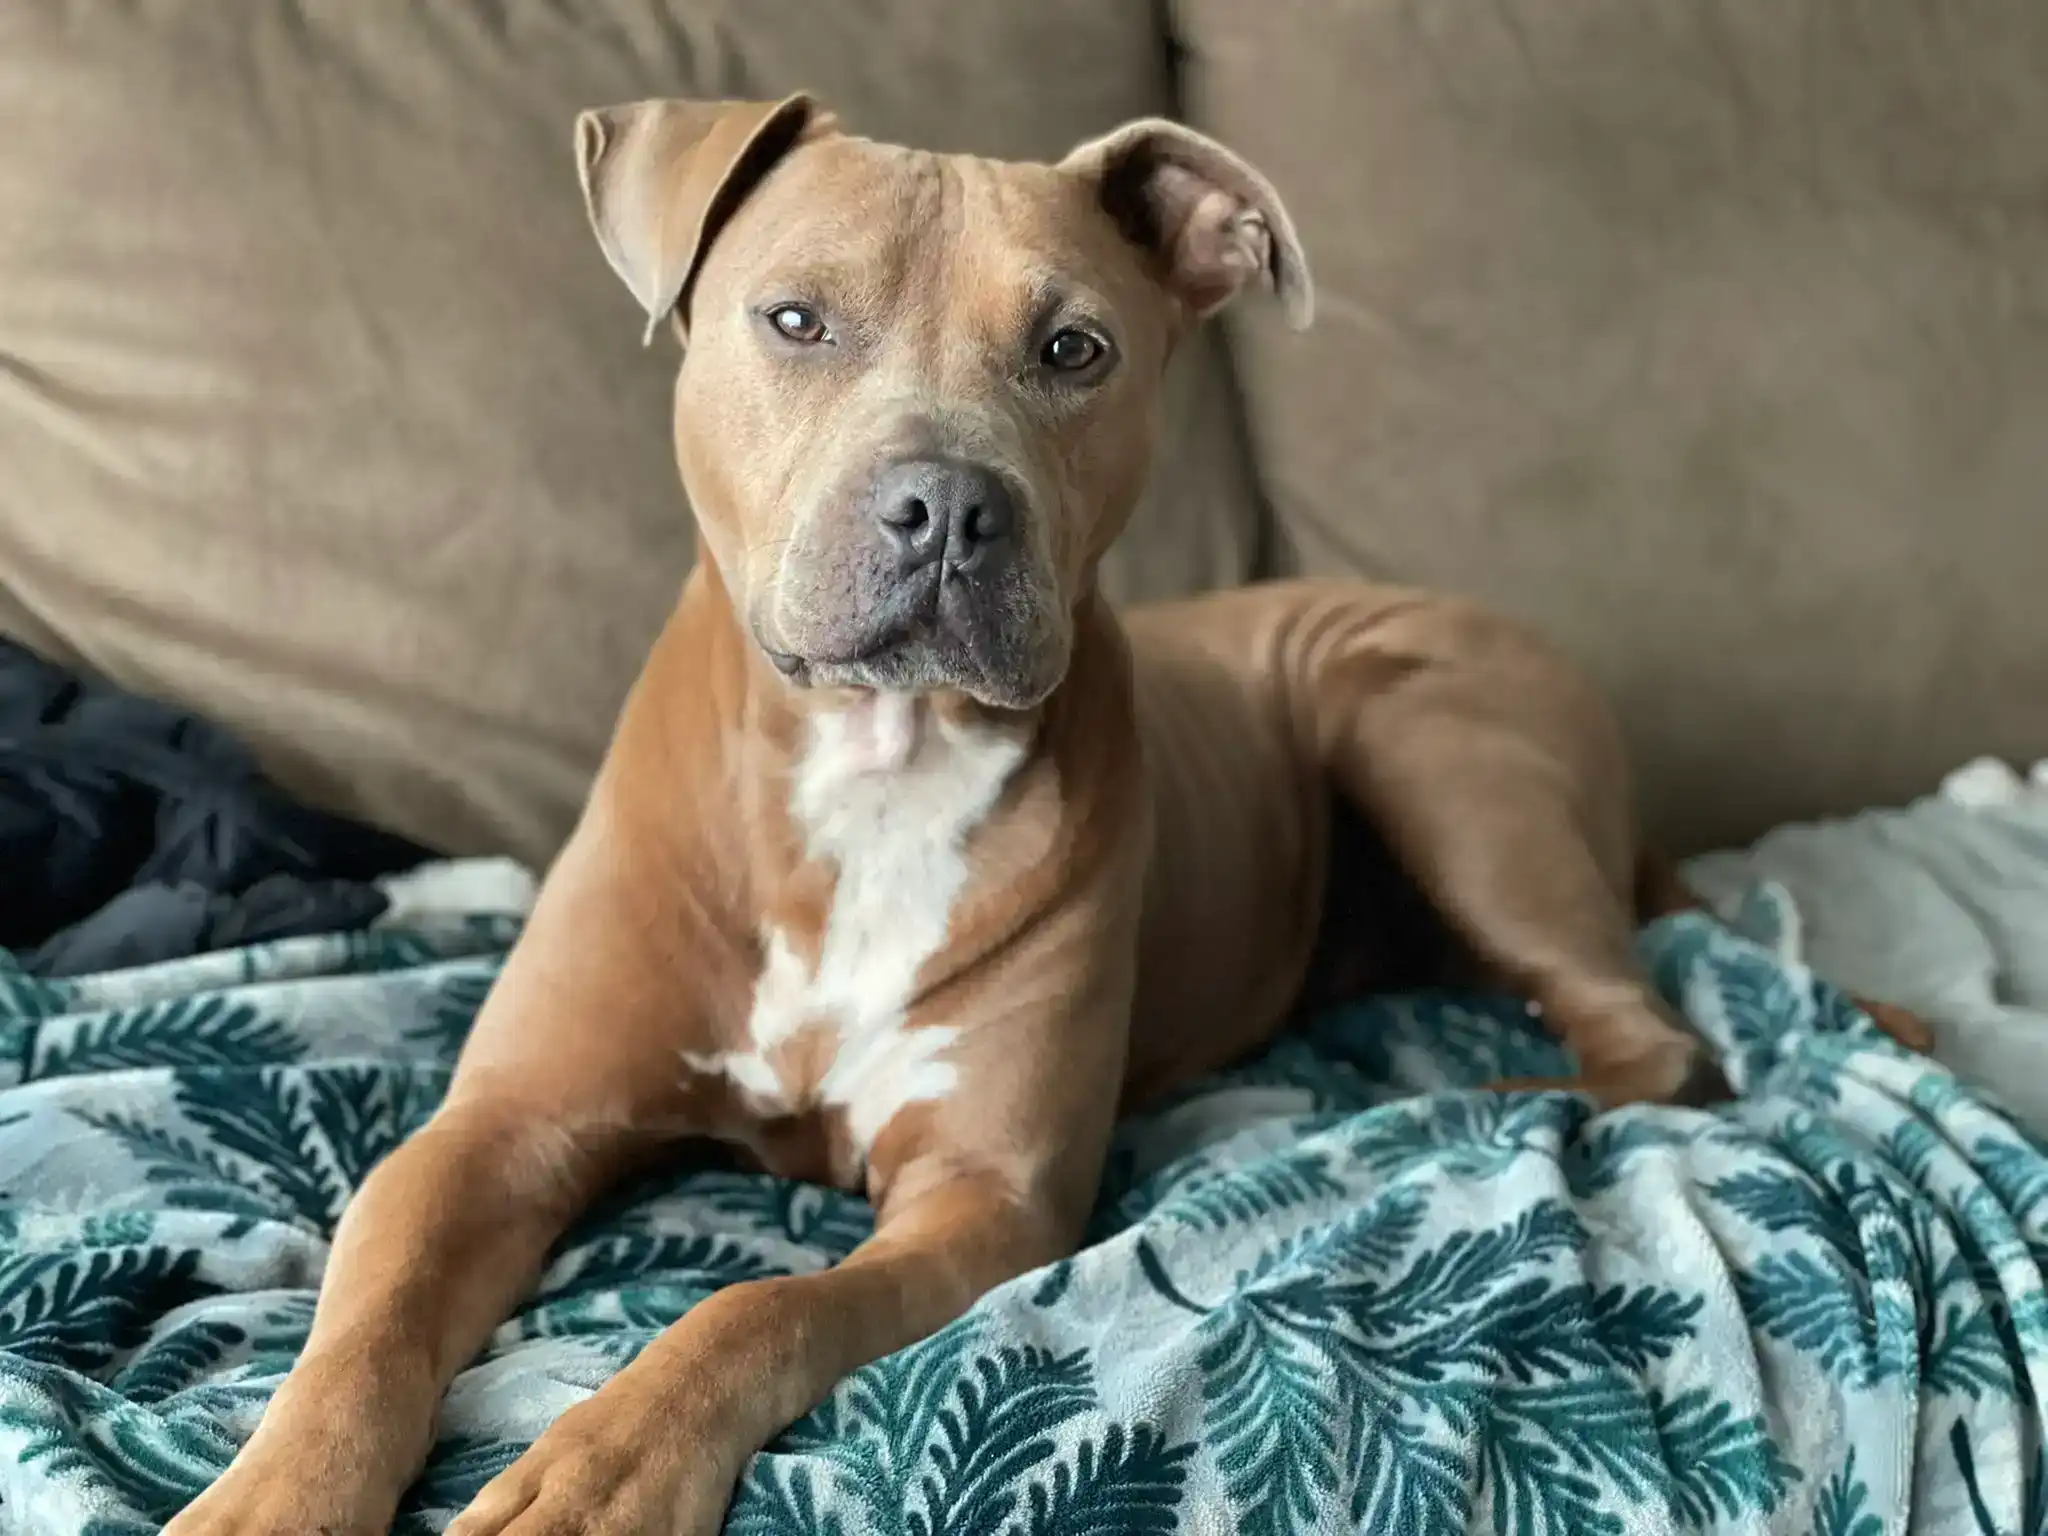 Clifford, a reddish-brown pitbull, posing on a couch and looking stoically at the camera